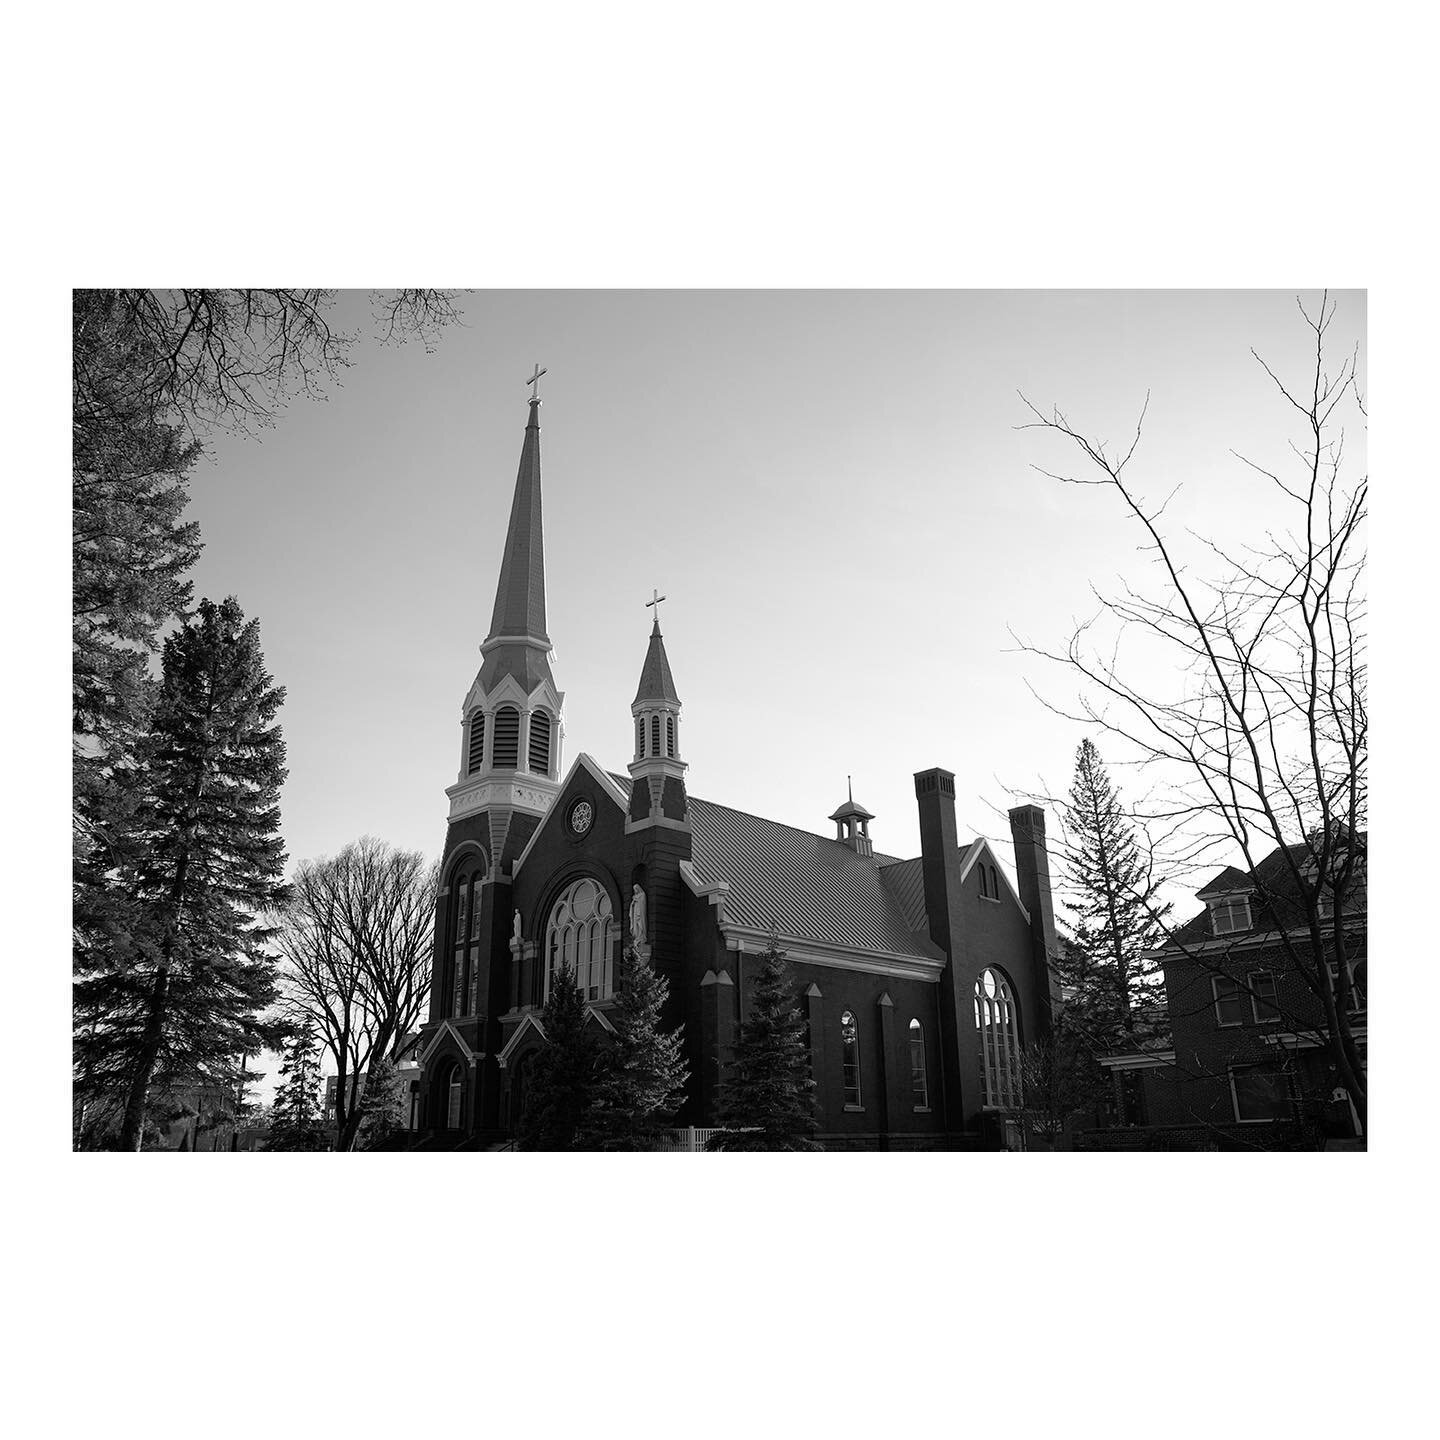 Church Architecture and Small Town Grocery Store documentary projects are now live on the site! 

Had a blast stepping into documentary photography this spring and editing in black and white for these class projects! 

Be sure to check them out when 